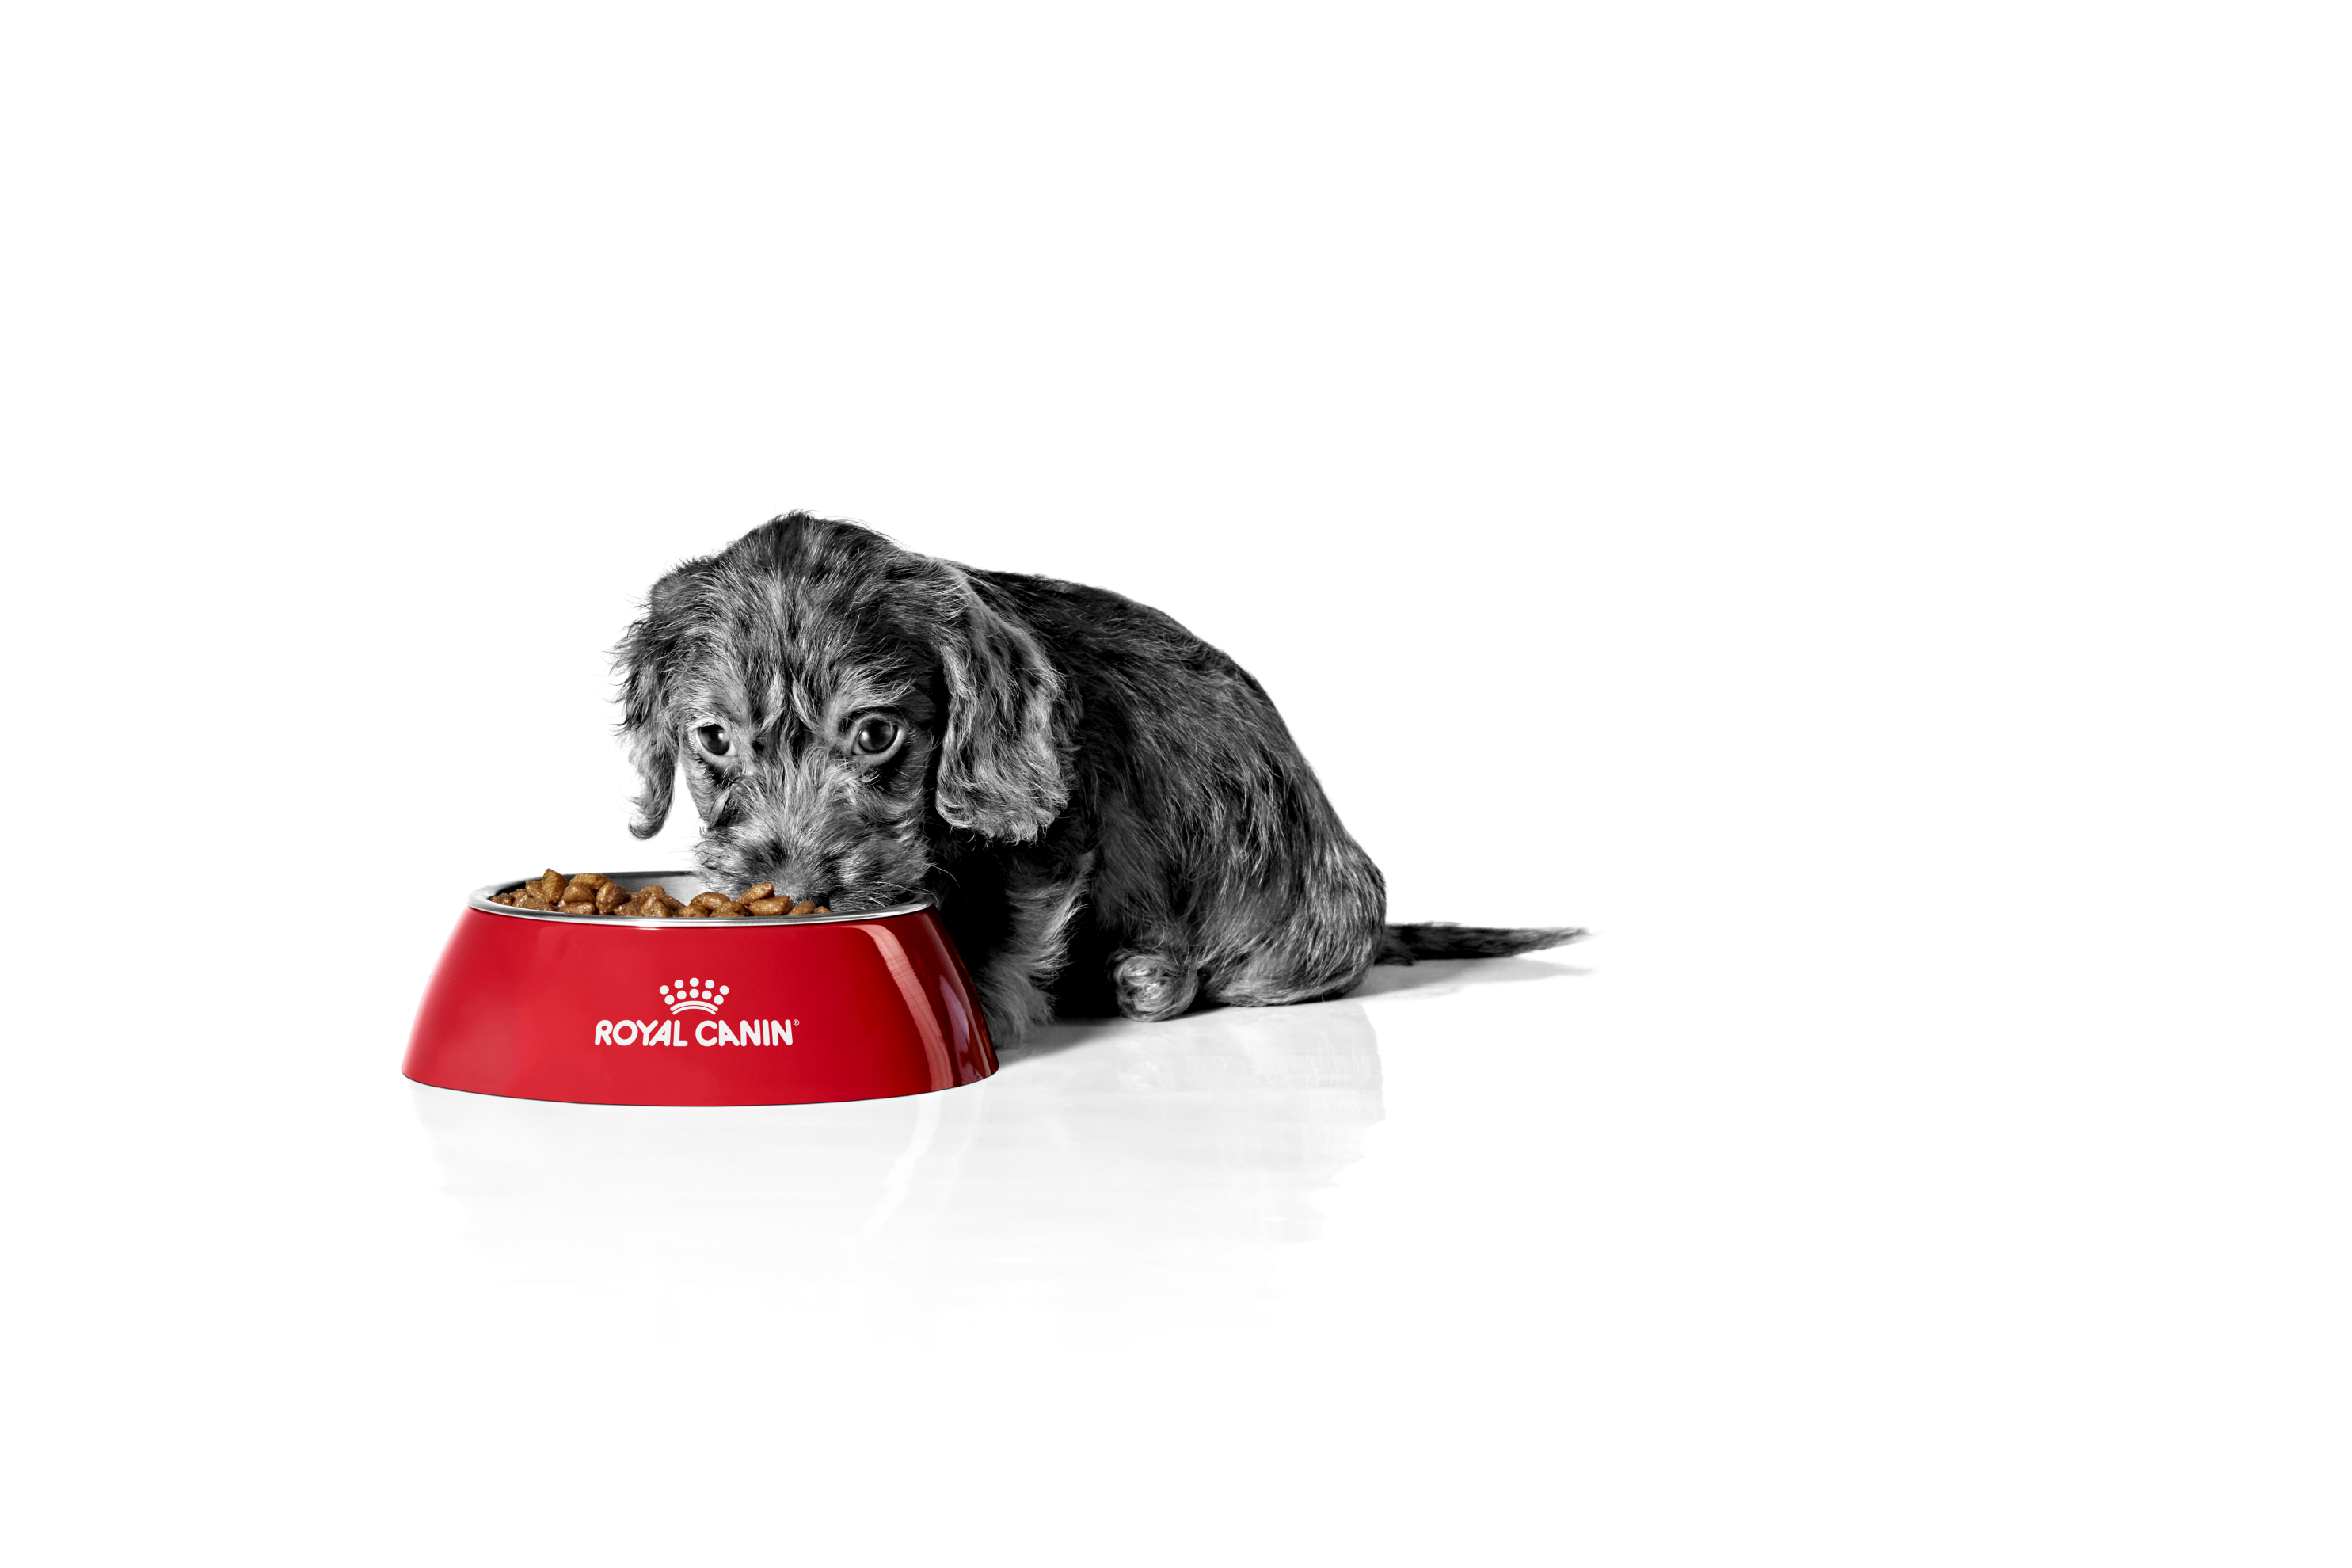 Dachshund puppy in black and white eating from a red bowl